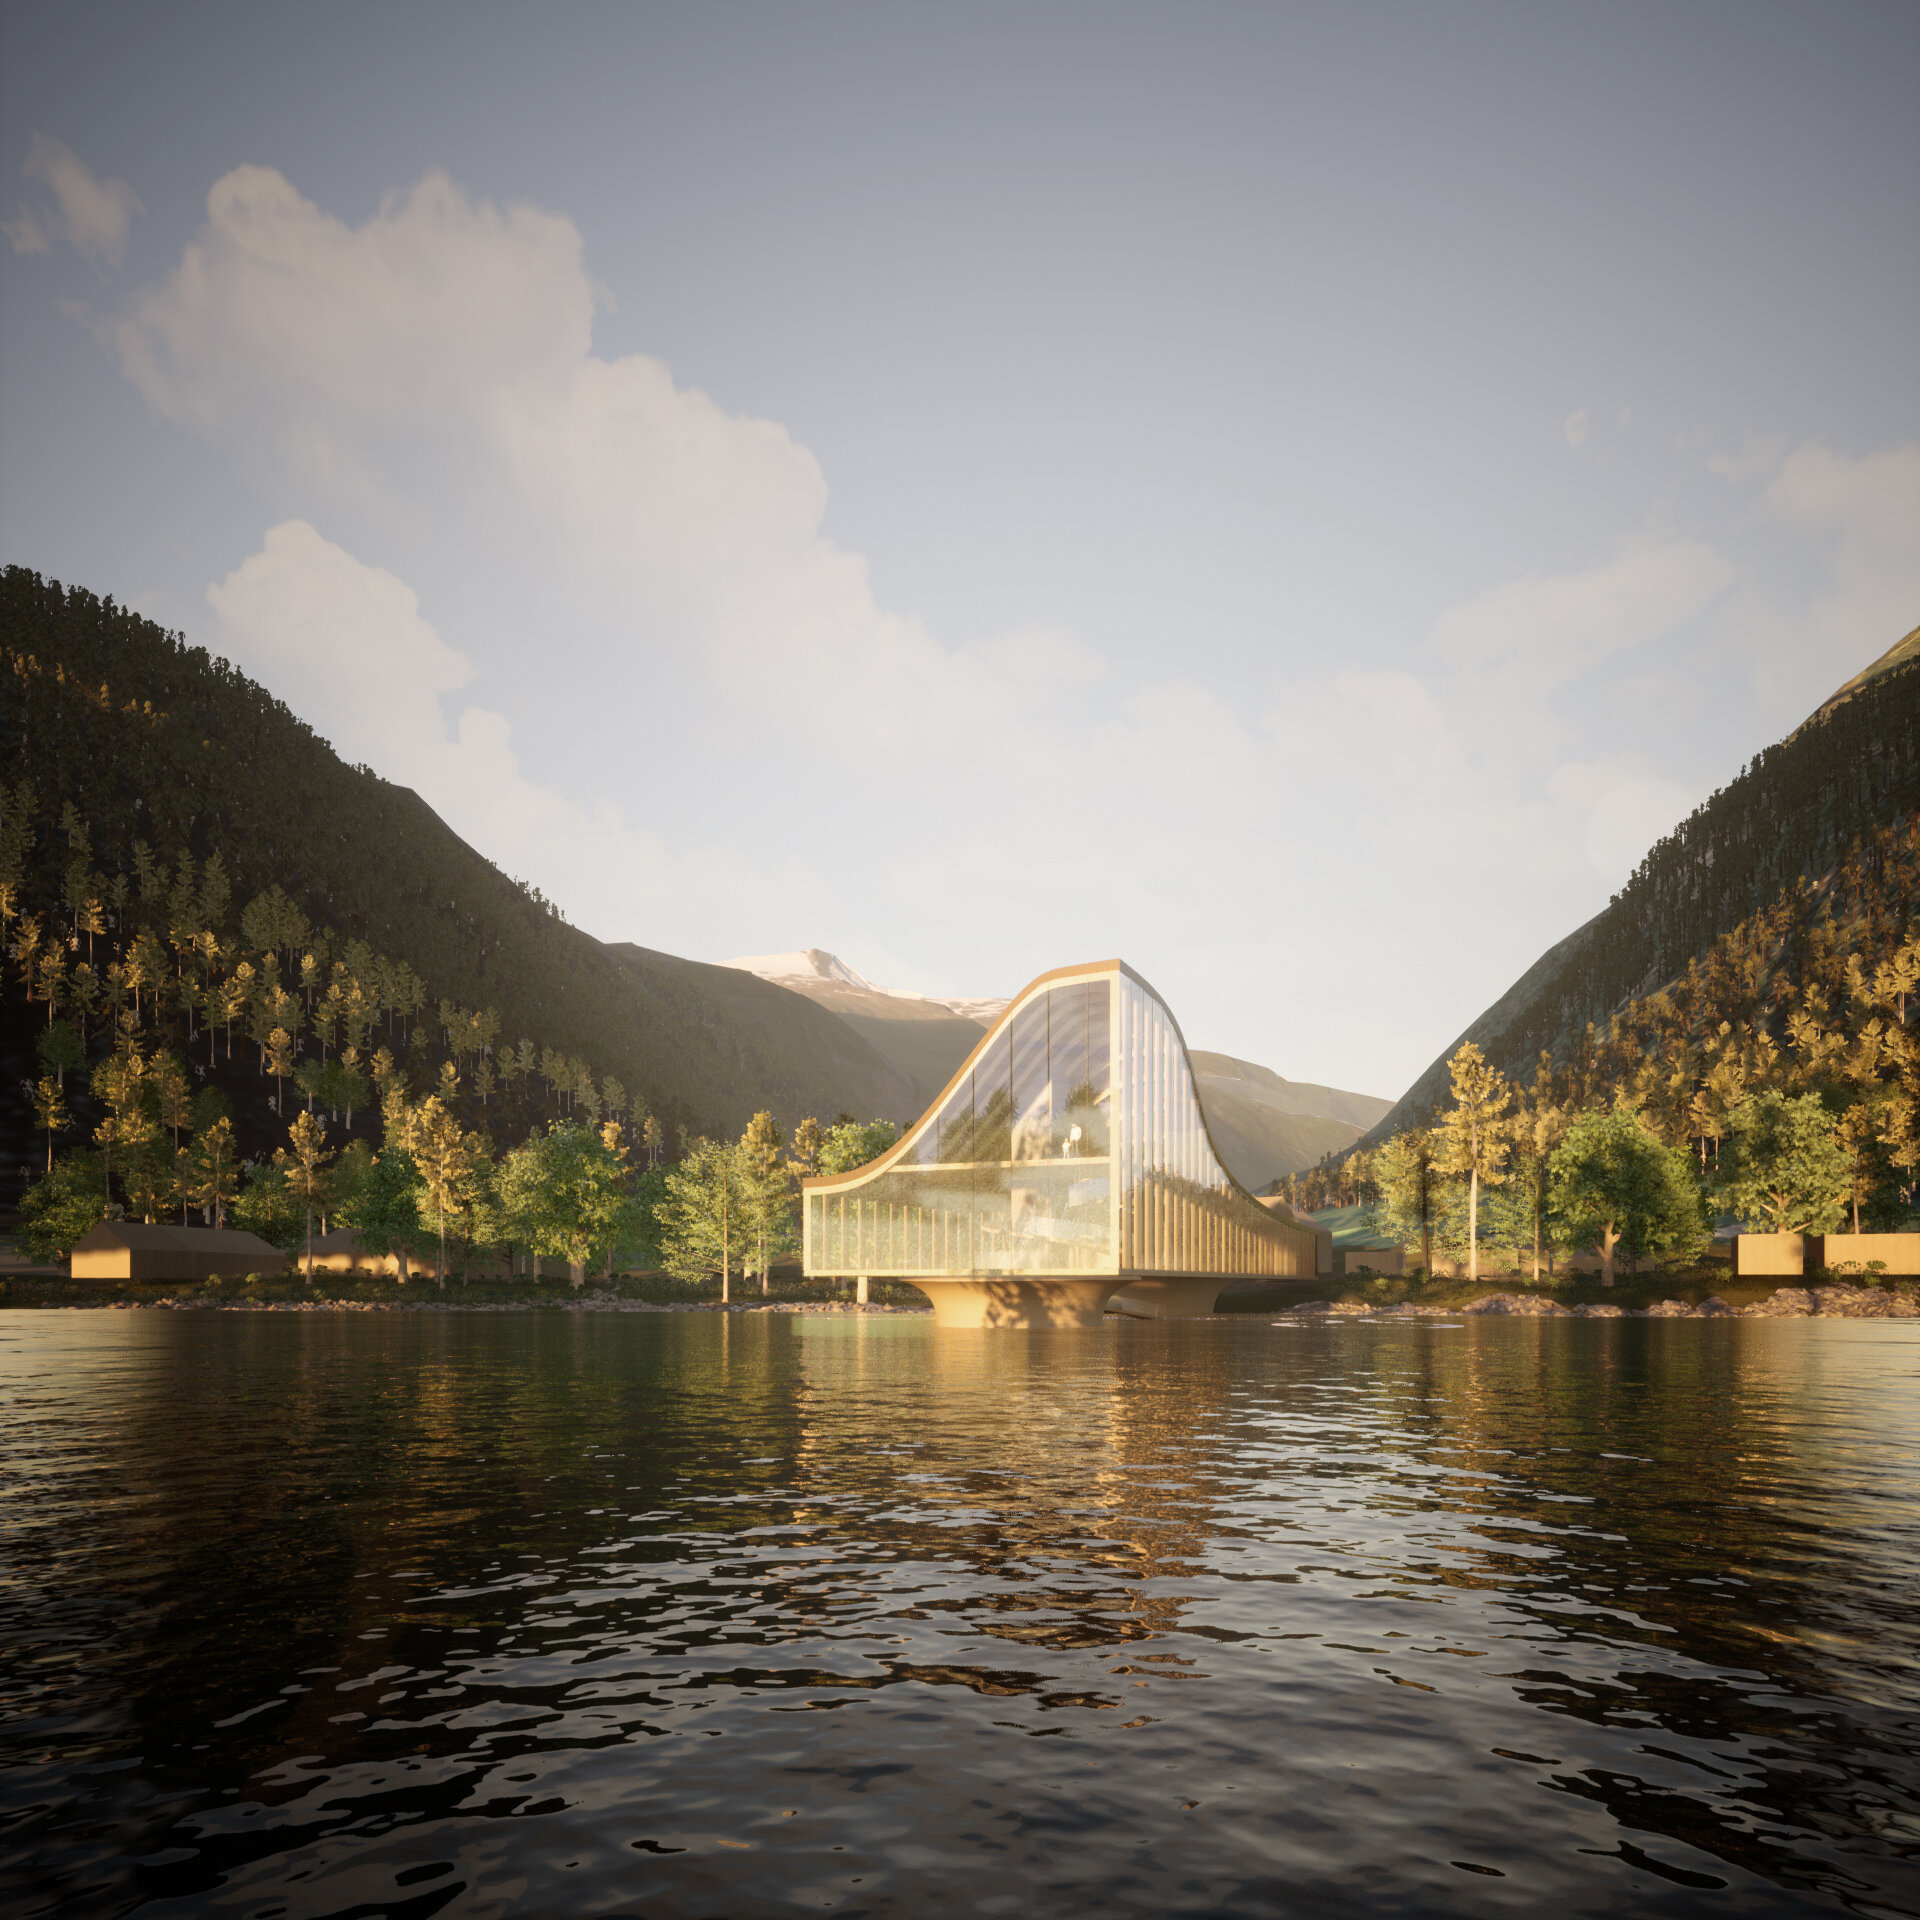  The volumetric shape of the roof adapts to the surrounding mountainsides and makes the building blend in with the scenery. 